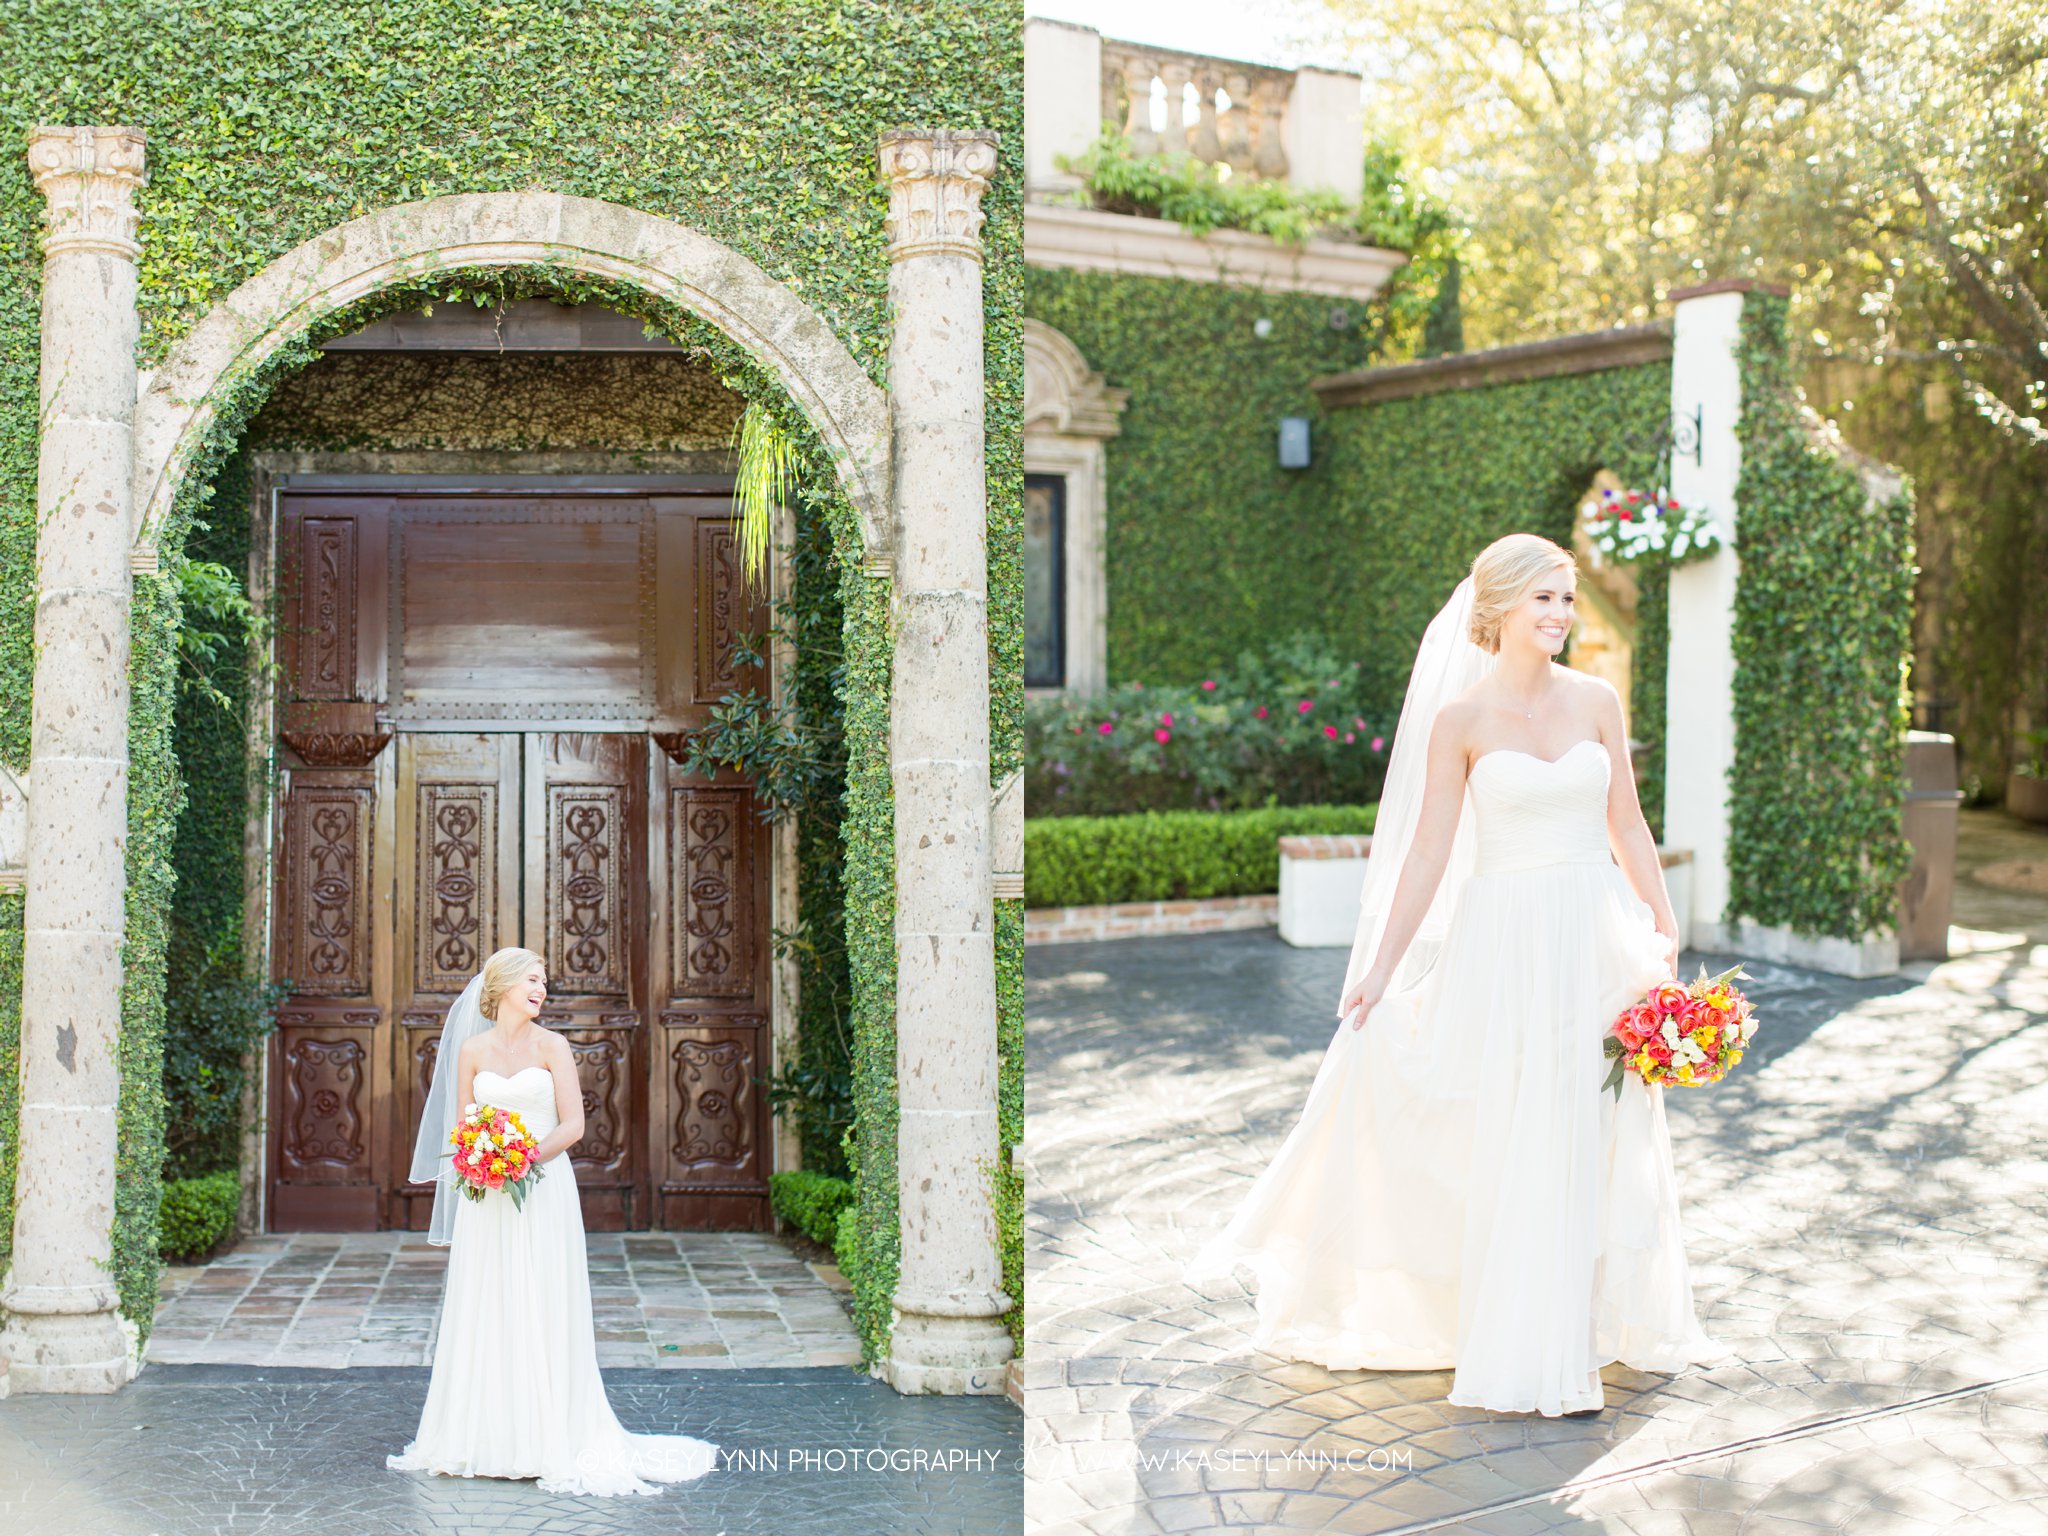 The Bell Tower on 34th Bridals / Kasey Lynn Photography